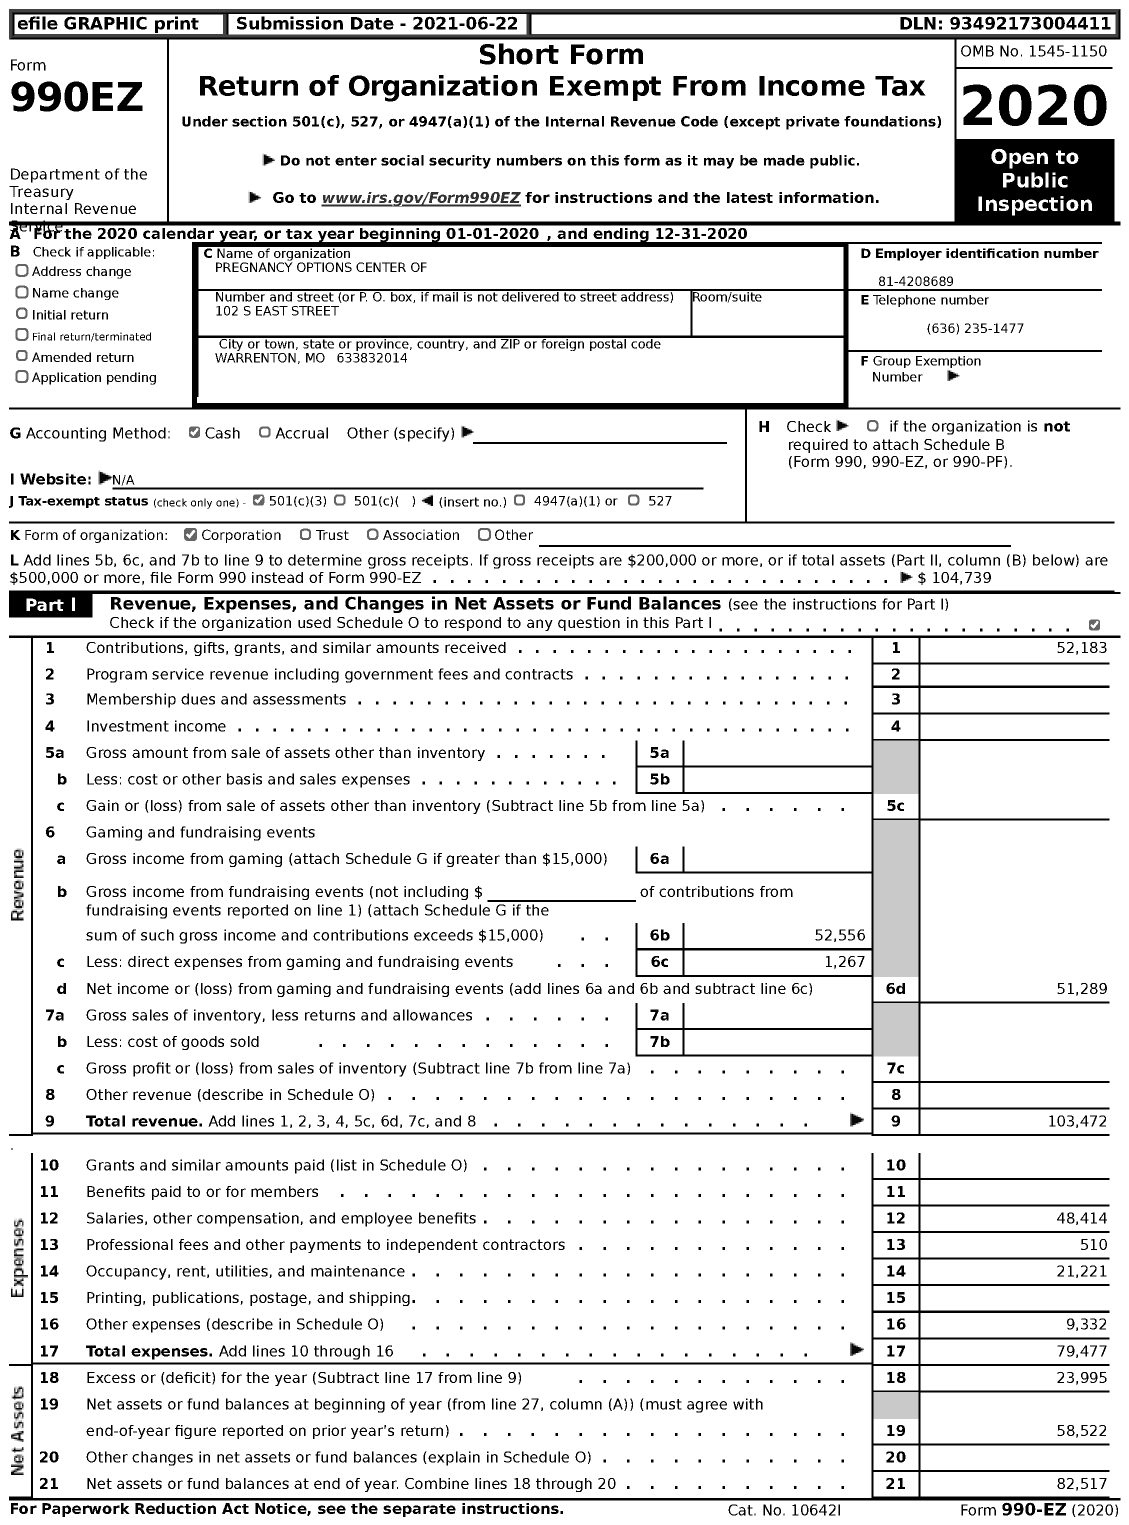 Image of first page of 2020 Form 990EZ for Pregnancy Options Center of